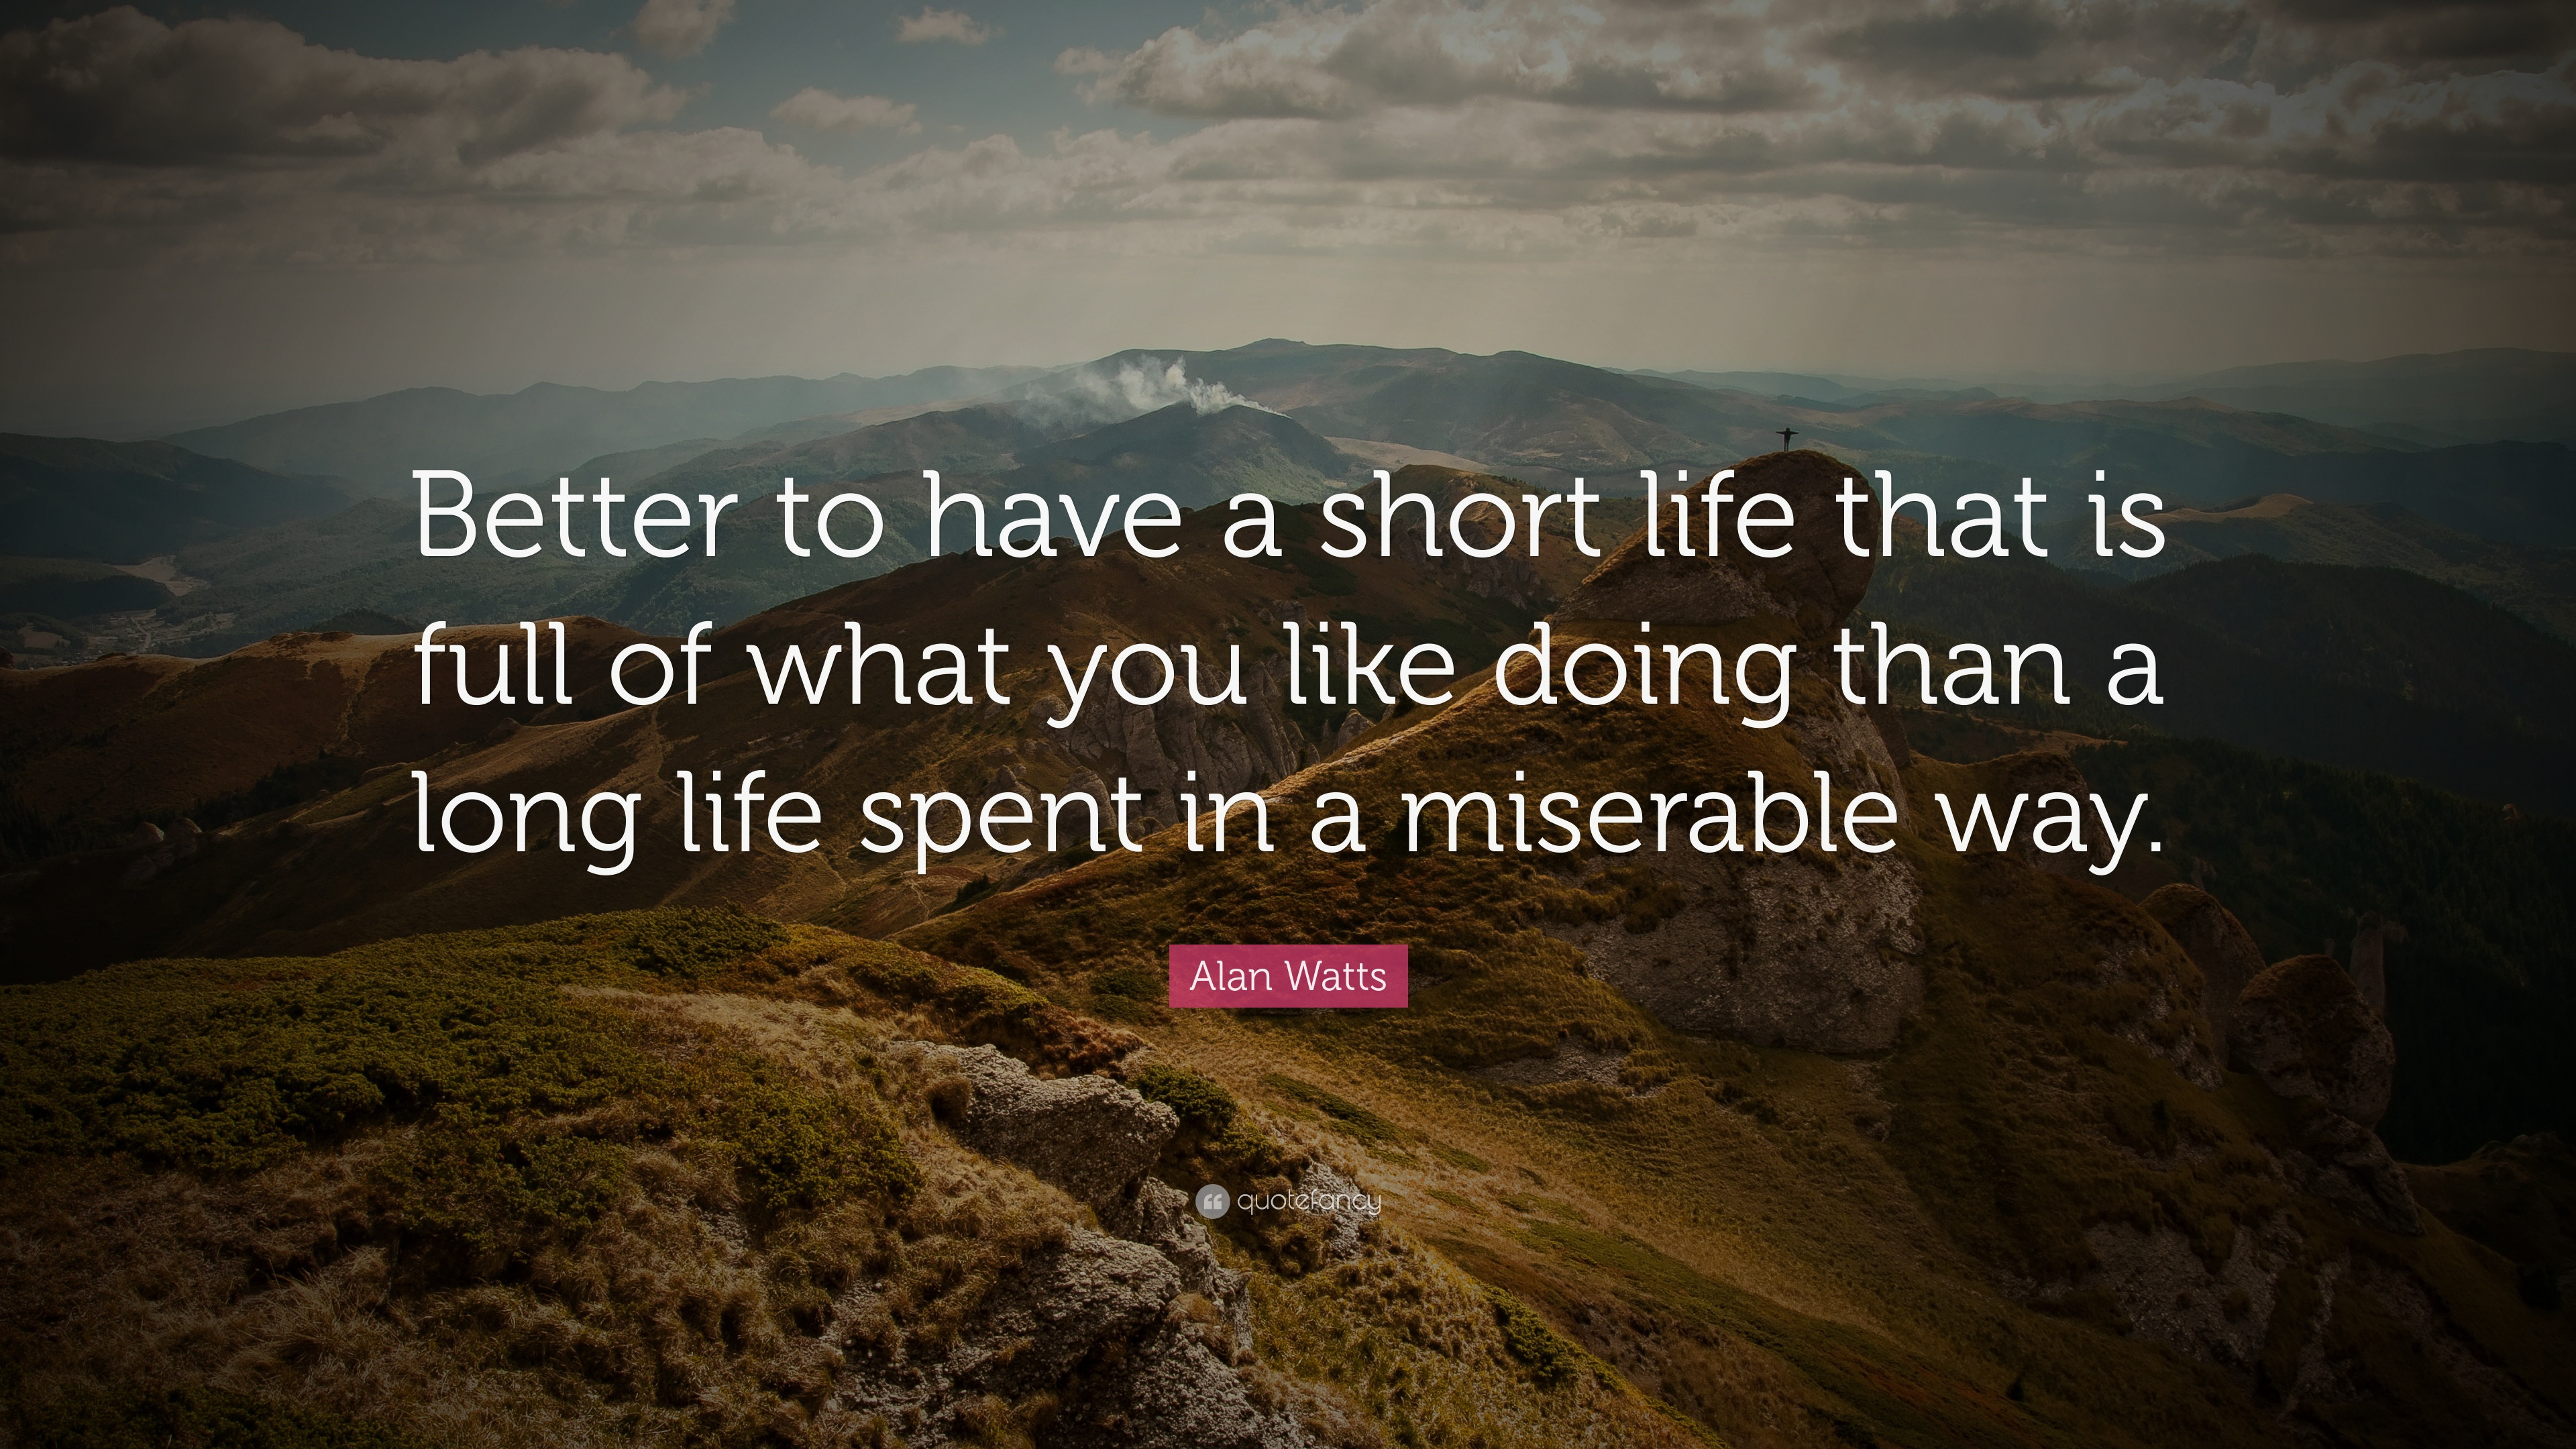 Alan Watts Quotes About Life
 Alan Watts Quote “Better to have a short life that is